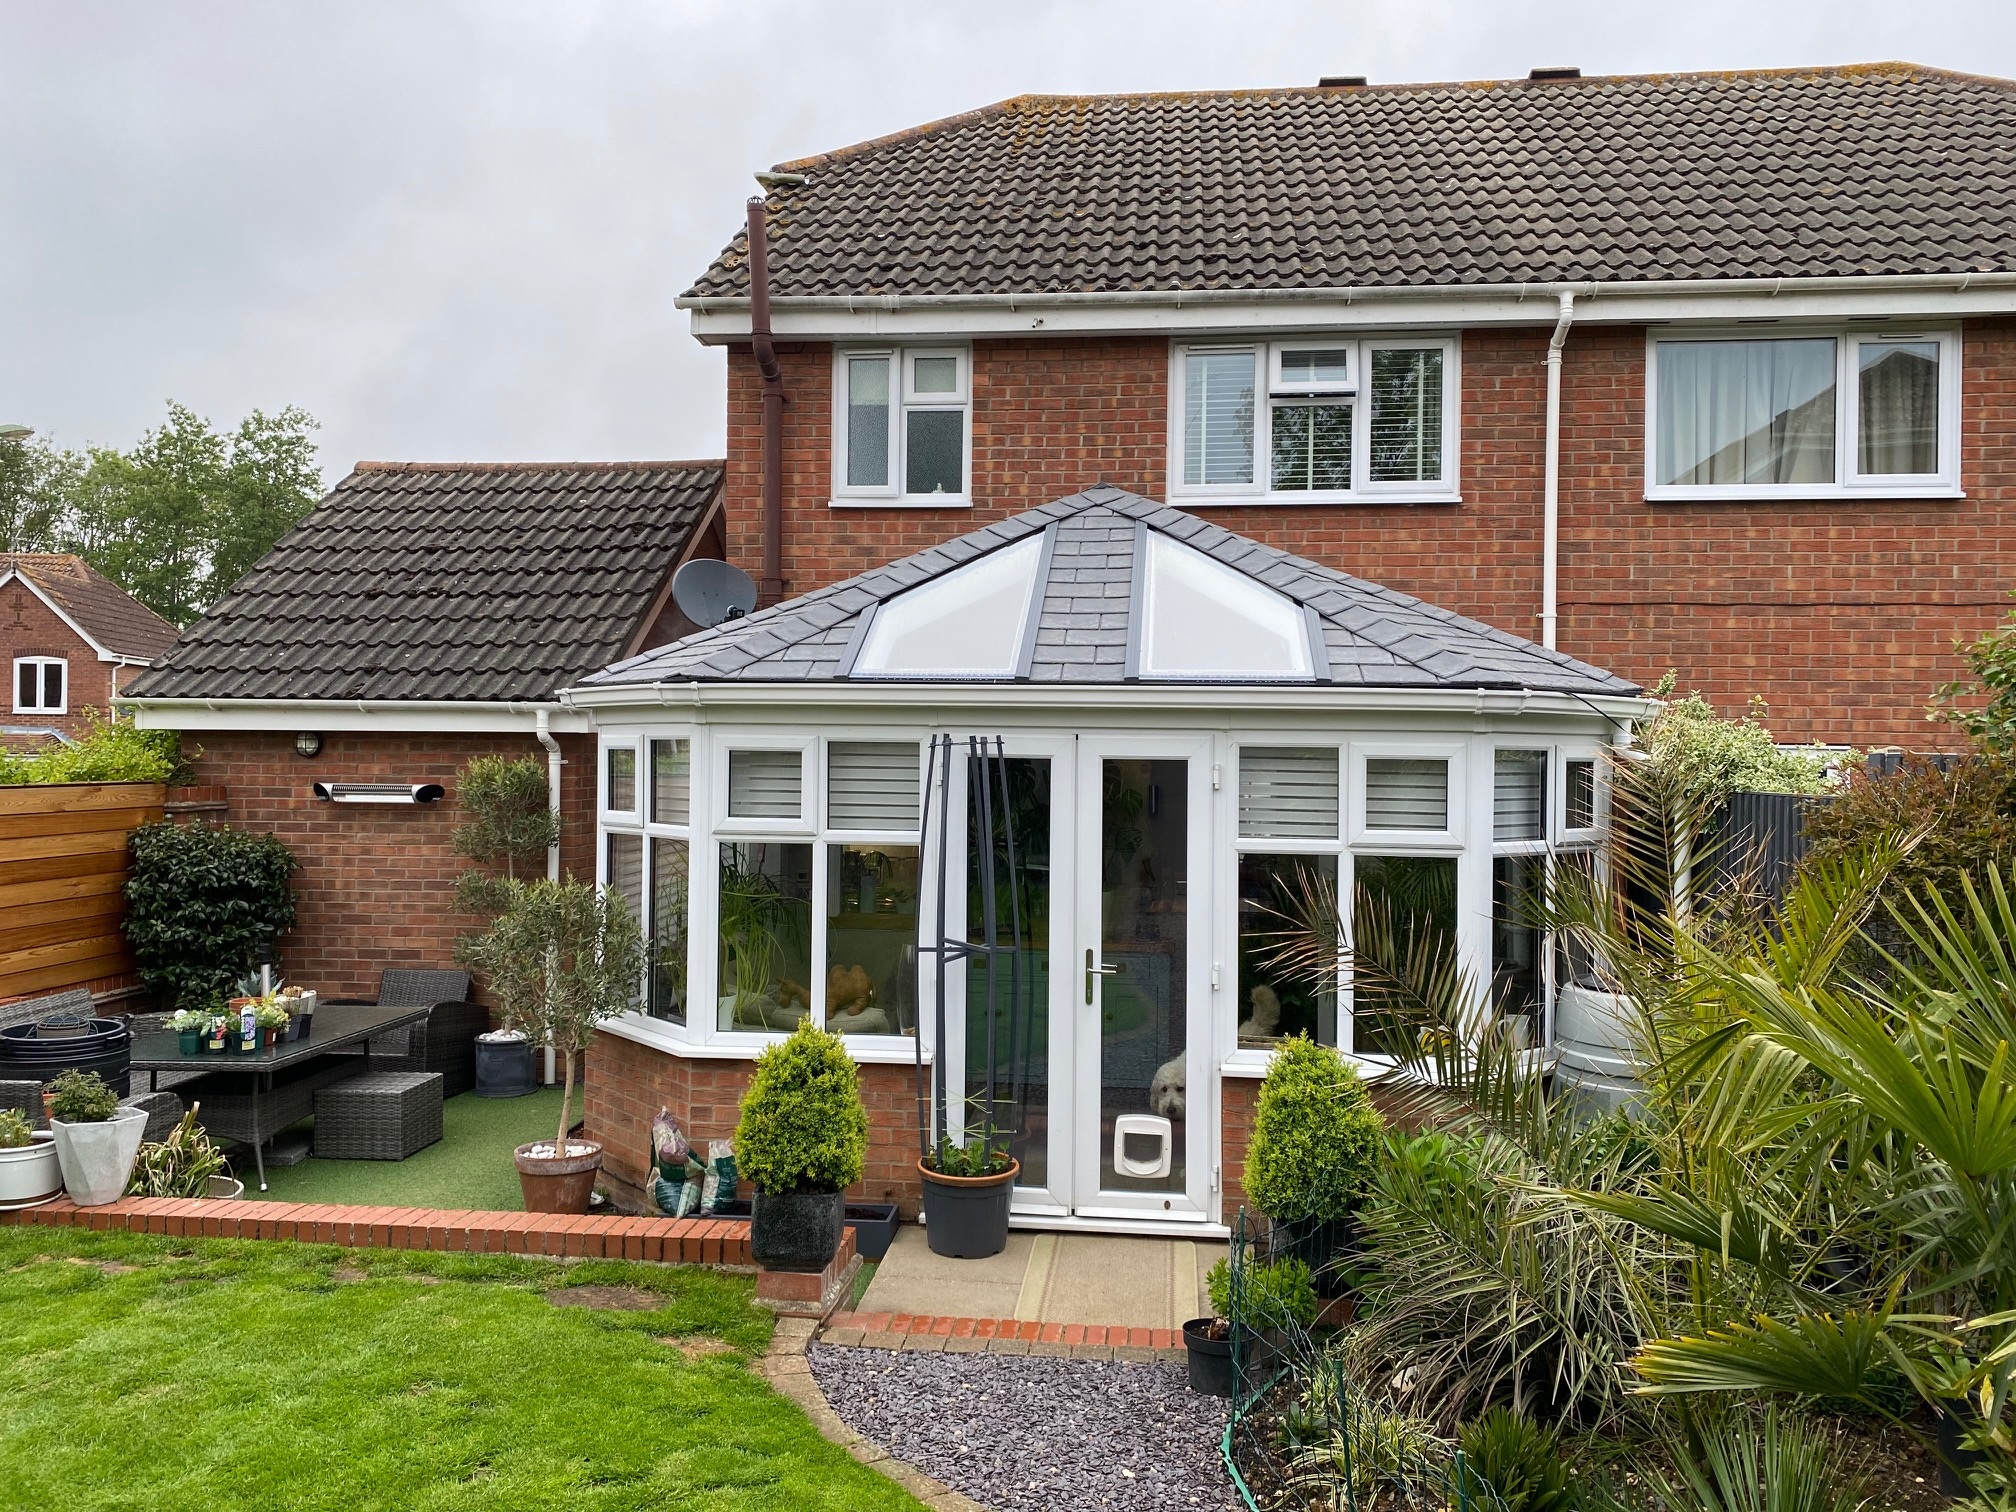 Conservatory in Suffolk after a Tiled Conservatory Roof Conversion